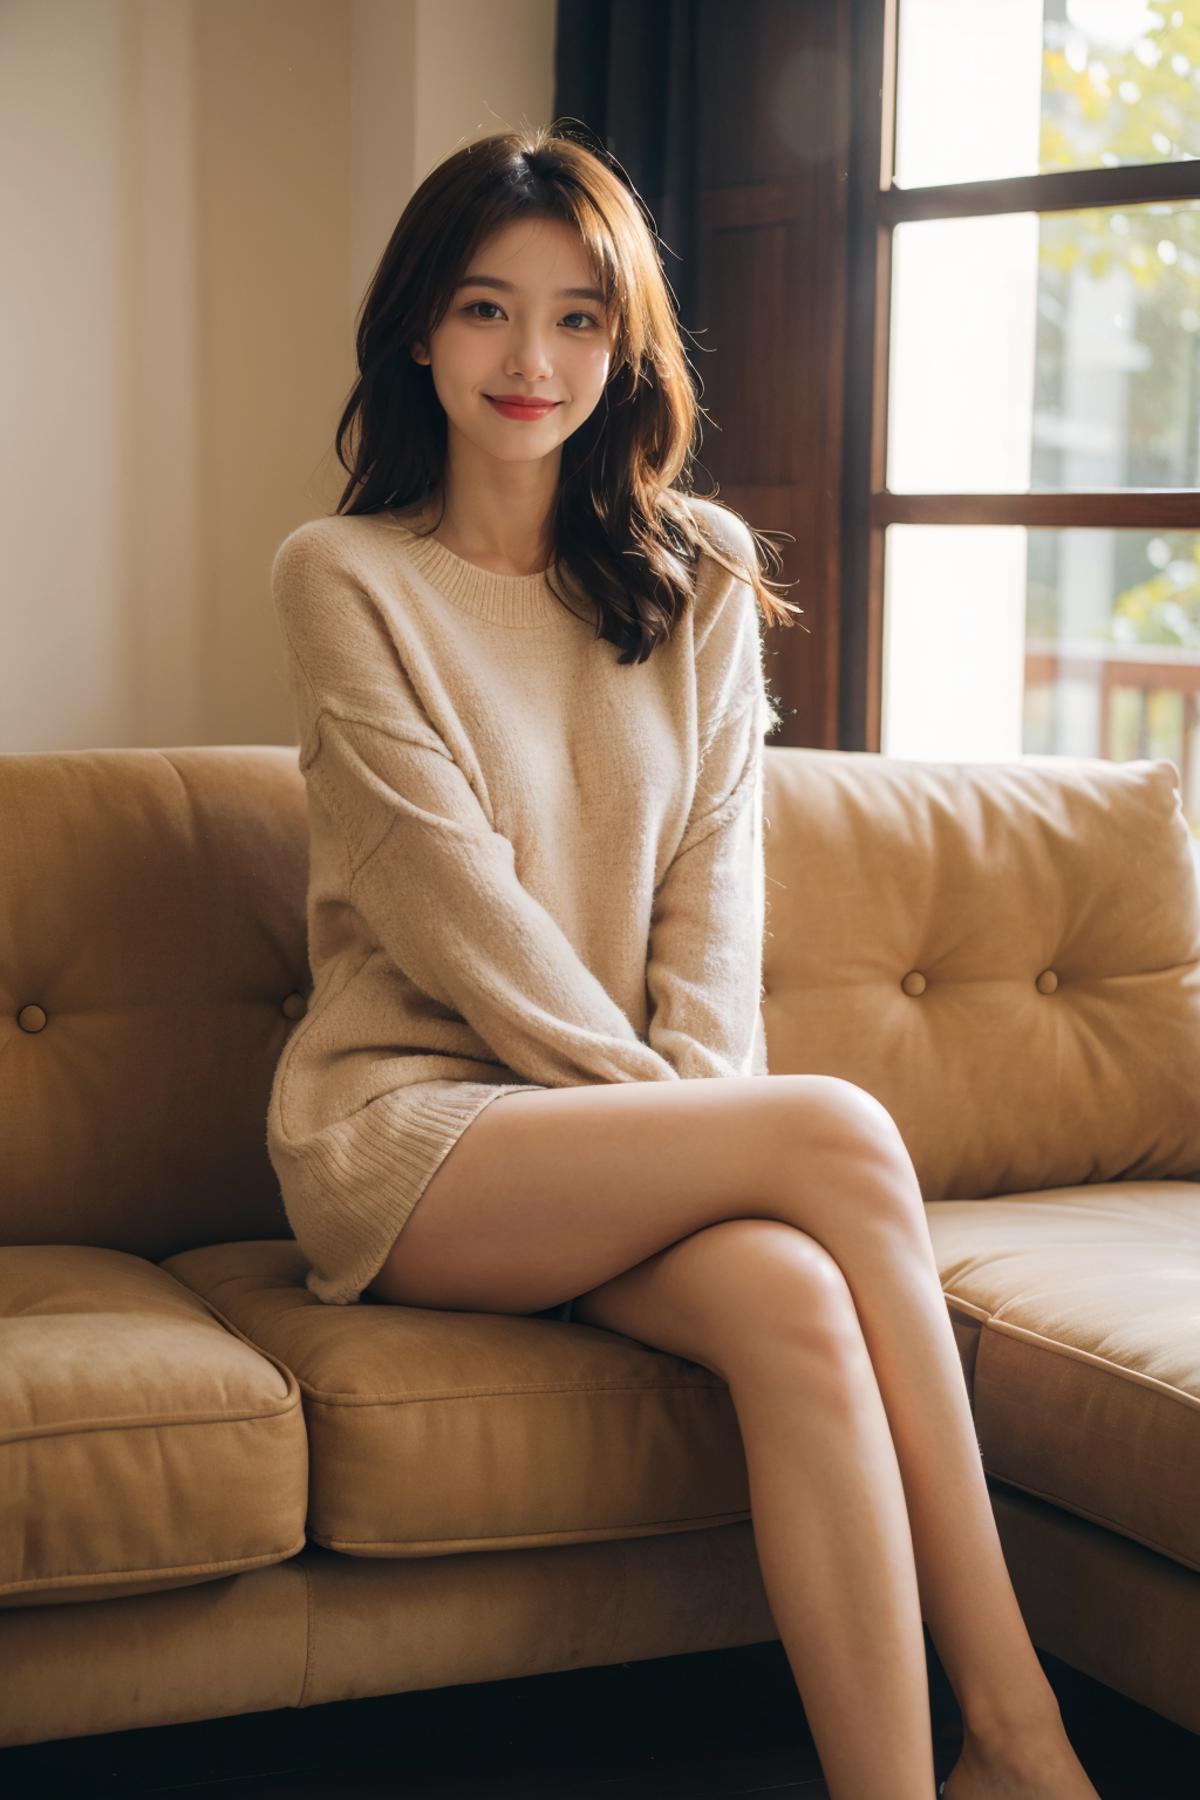 Woman in a white sweater sitting on a couch.